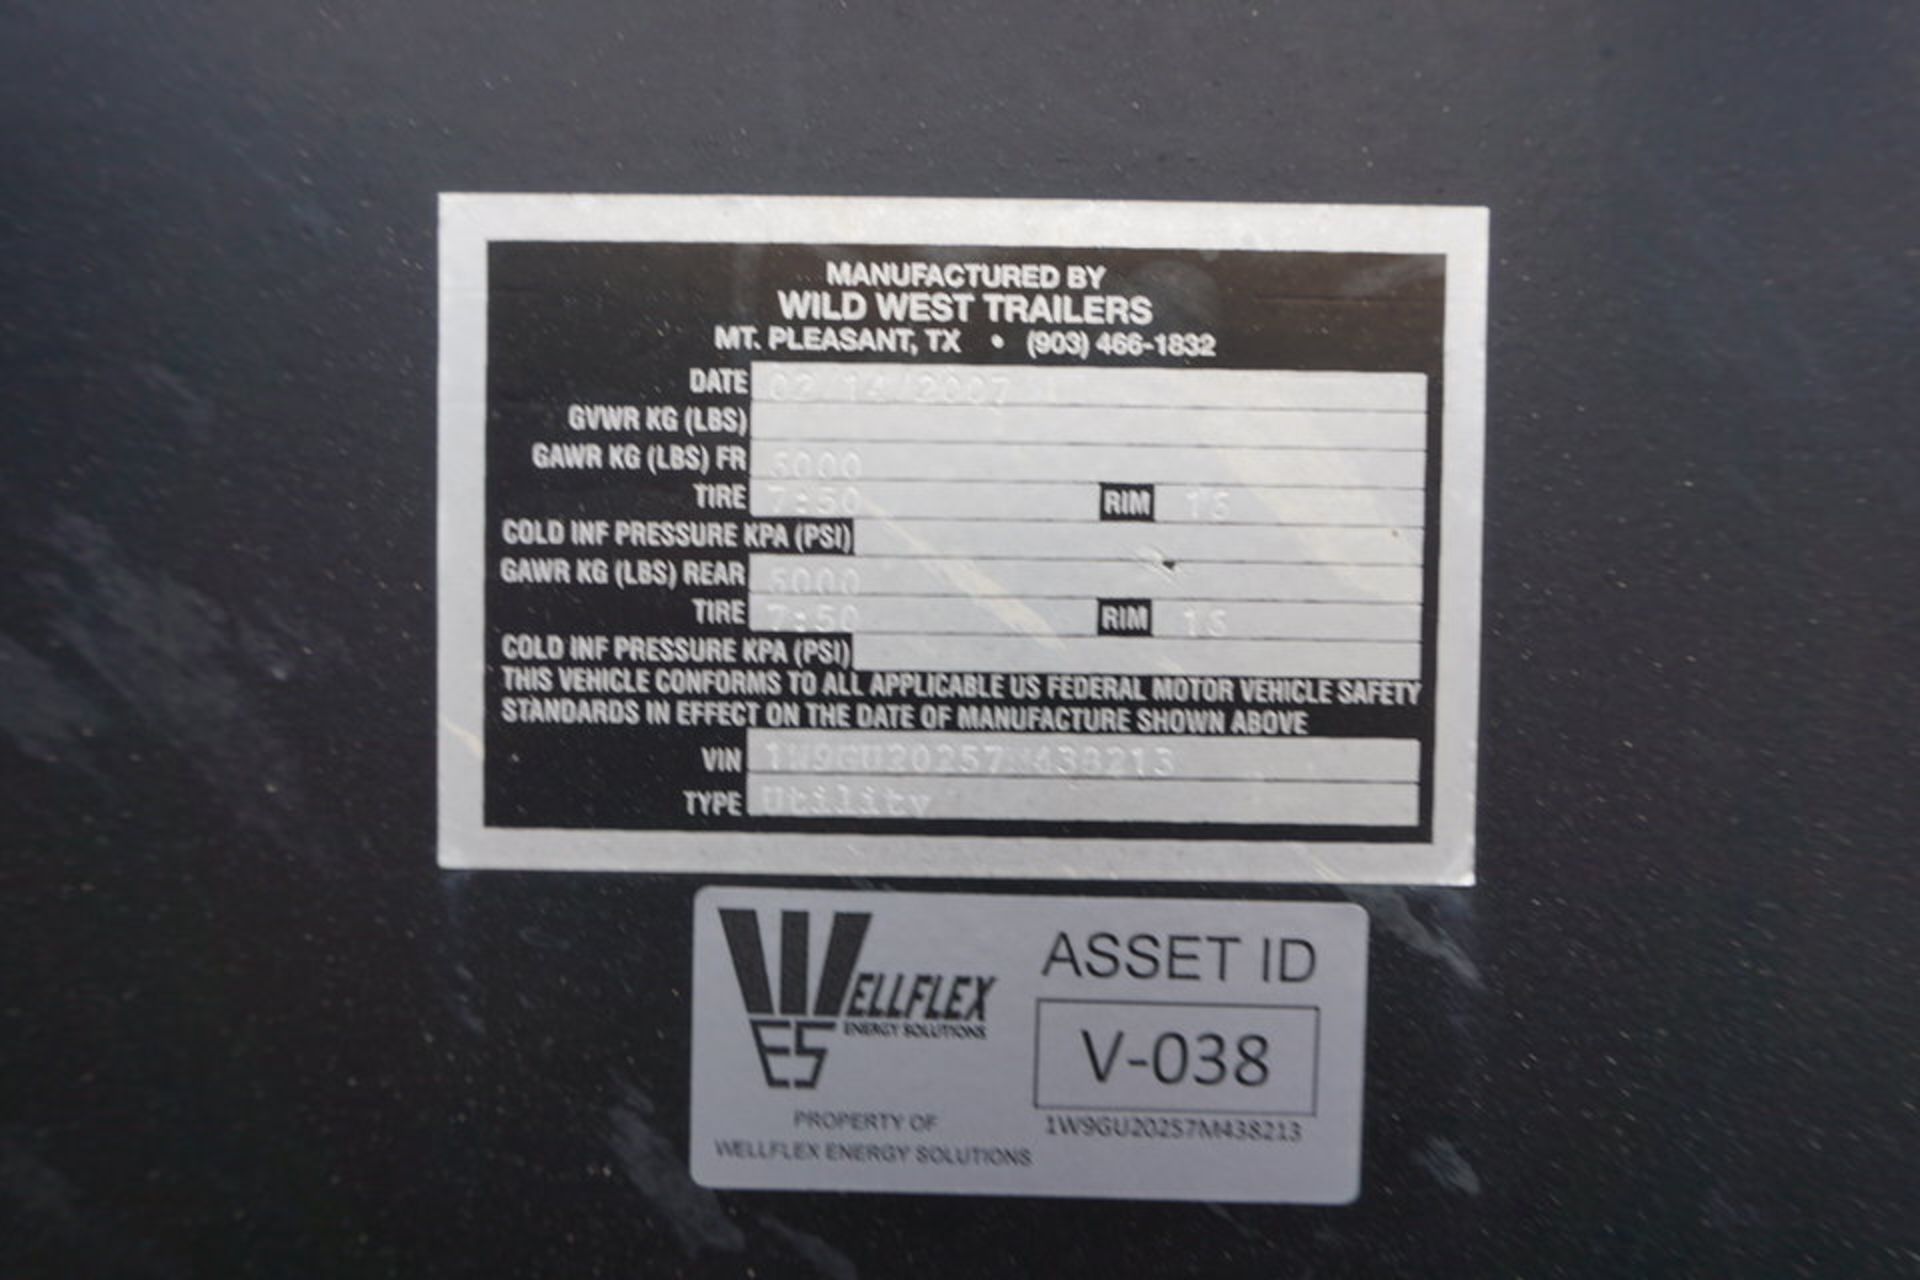 2007 8' x 20' WILDWEST UTILITY TRAILER, (MUST BE REMOVED BY DECEMBER 22) - Image 6 of 7